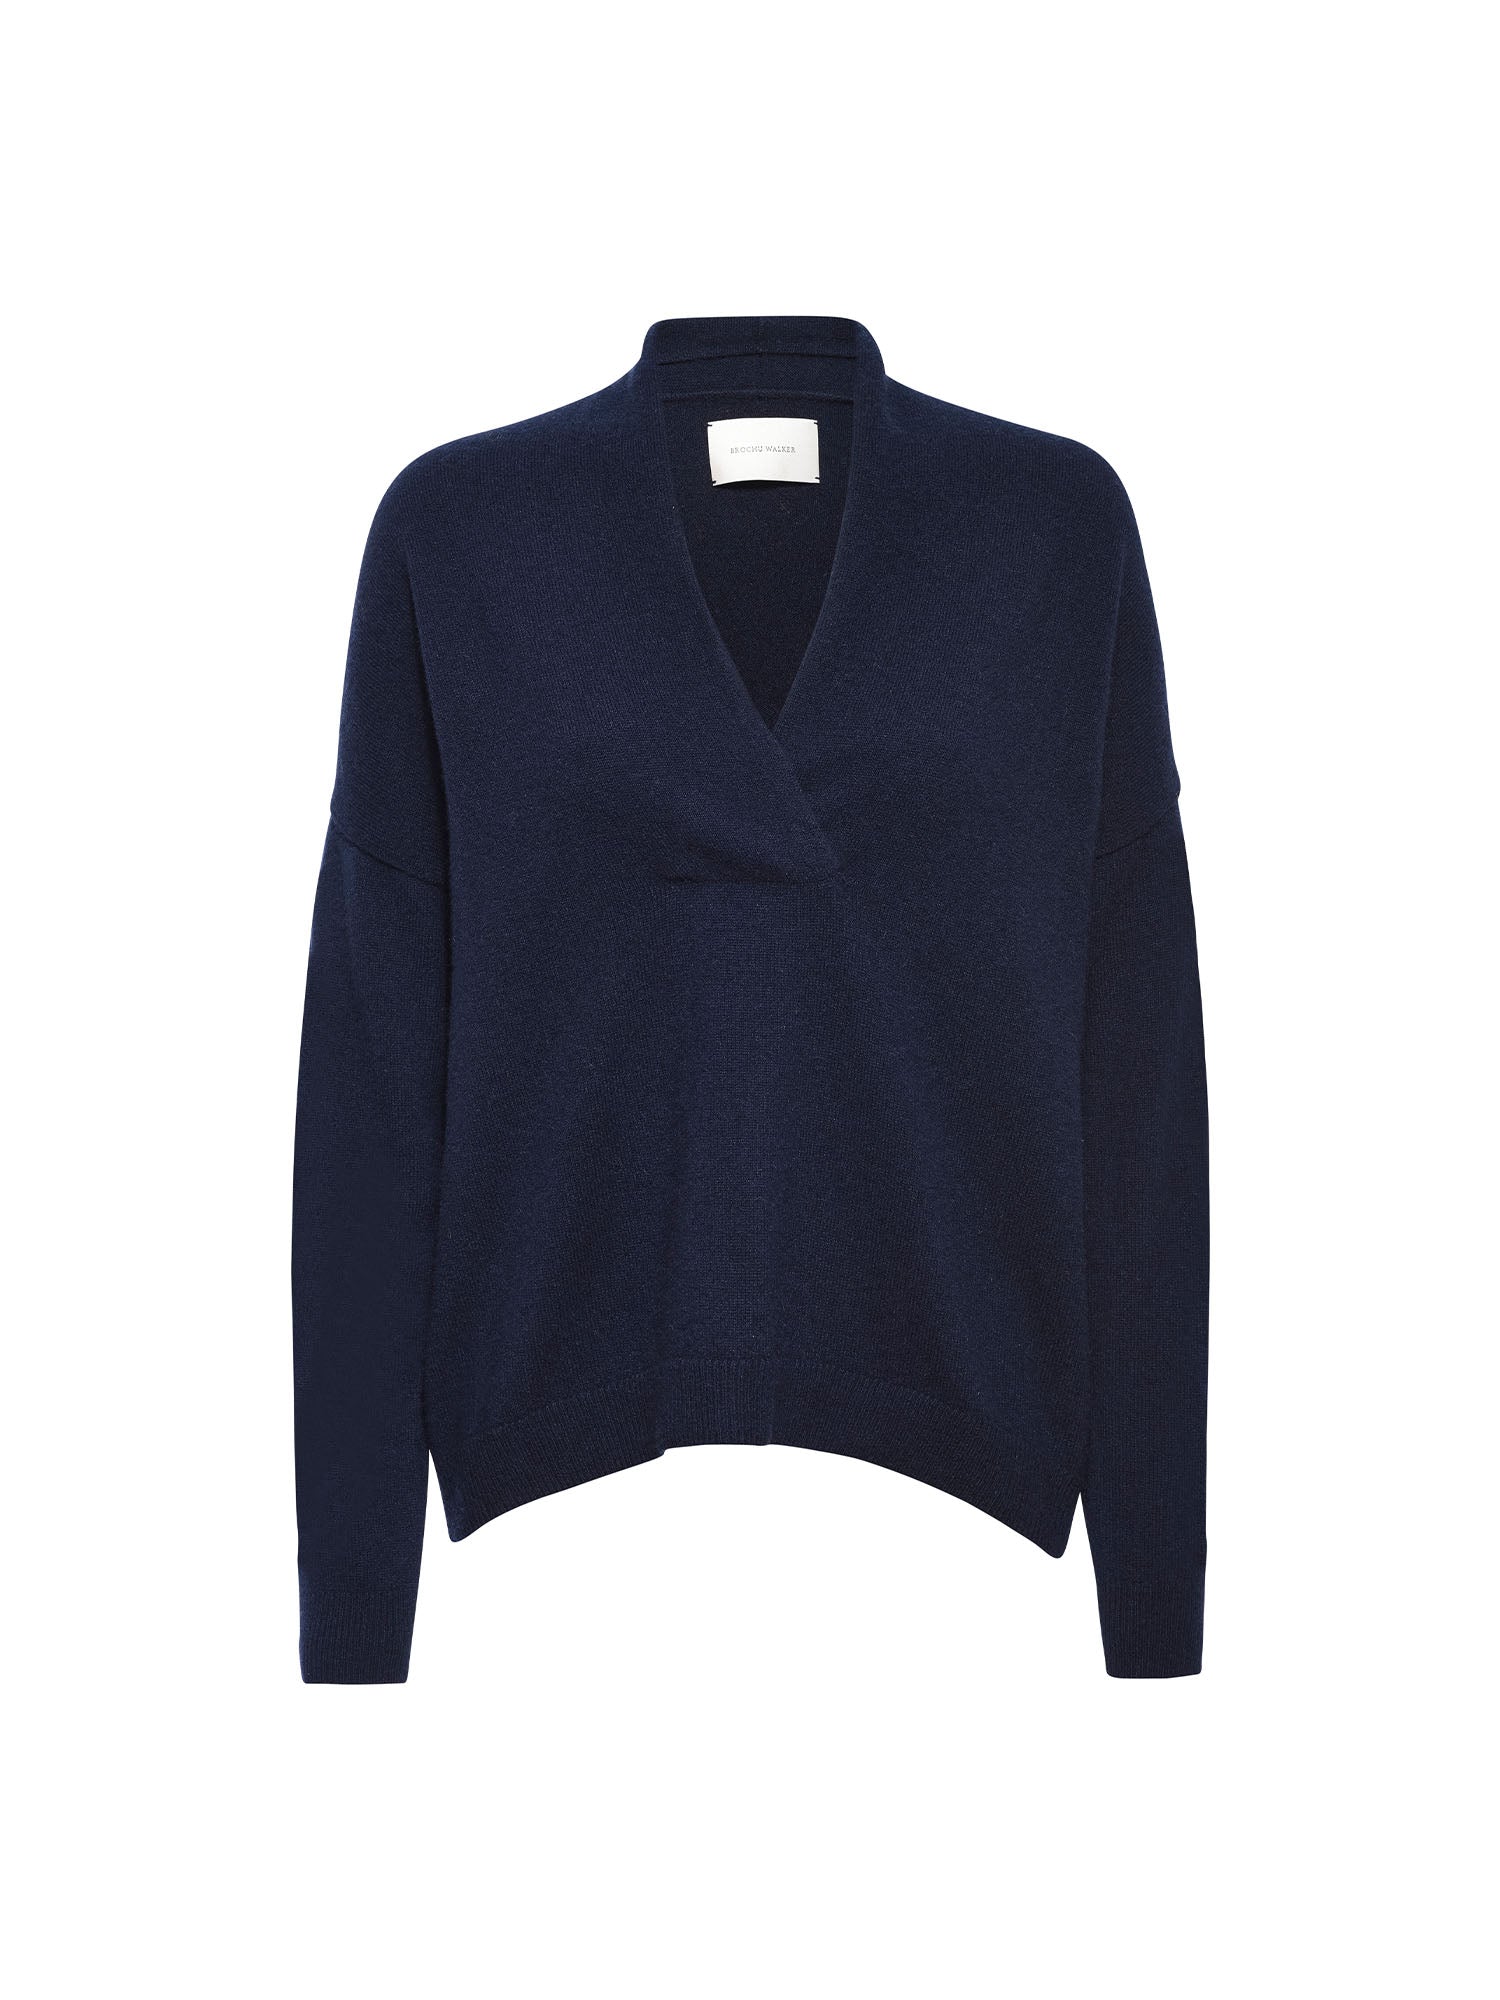 Siena v-neck pullover navy sweater flat view